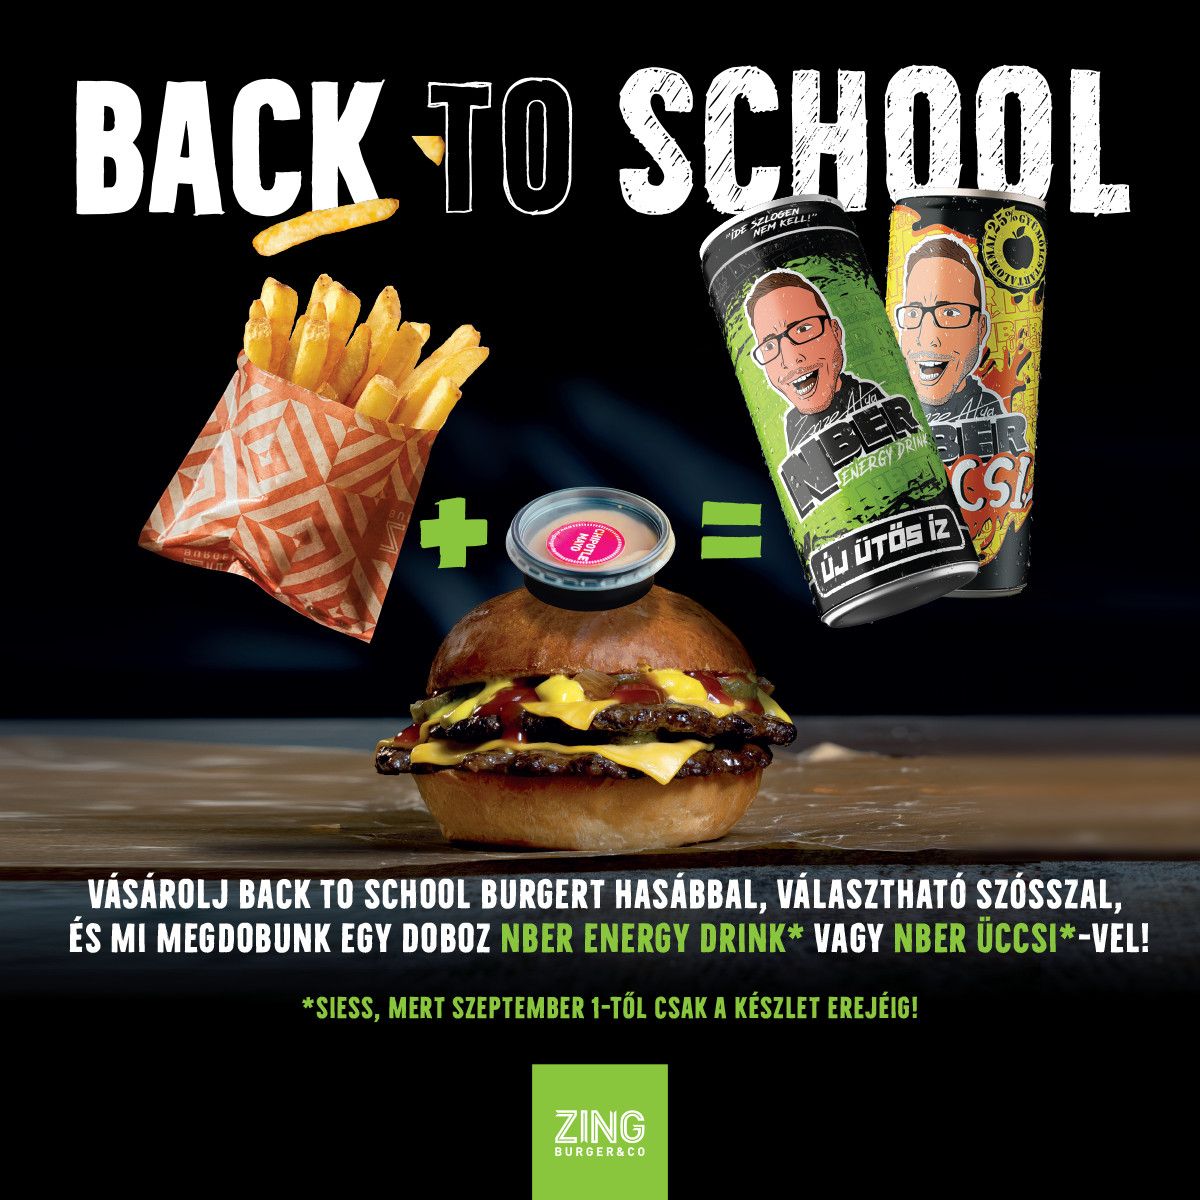 Back to School hamburger: Zing offers good prices for students and teachers - Zsozeatya also joined the party